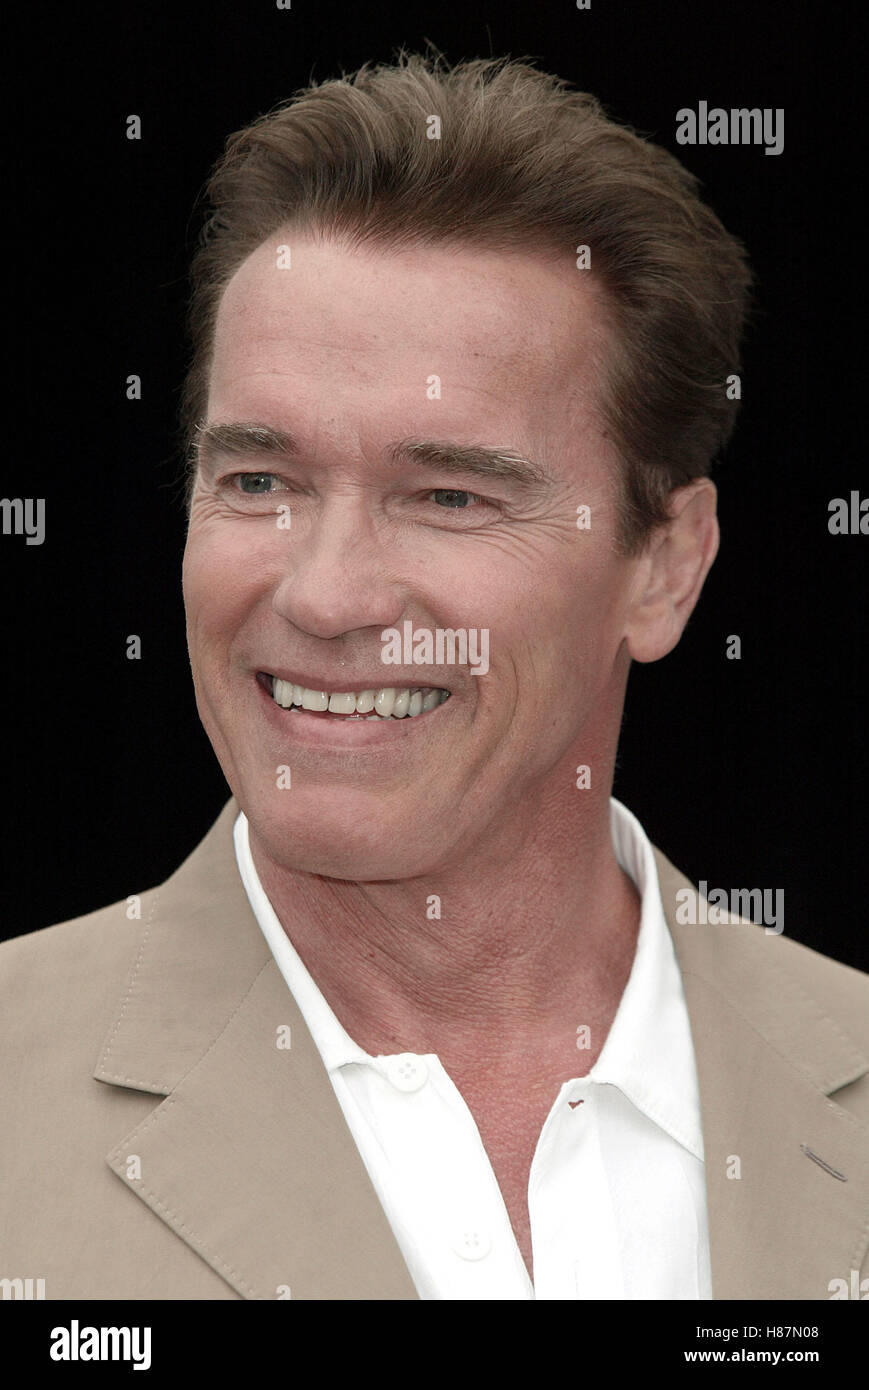 ARNOLD SCHWARZENEGGER CANNES FILM FESTIVAL CANNES FRANCE 17 May 2003 Stock Photo